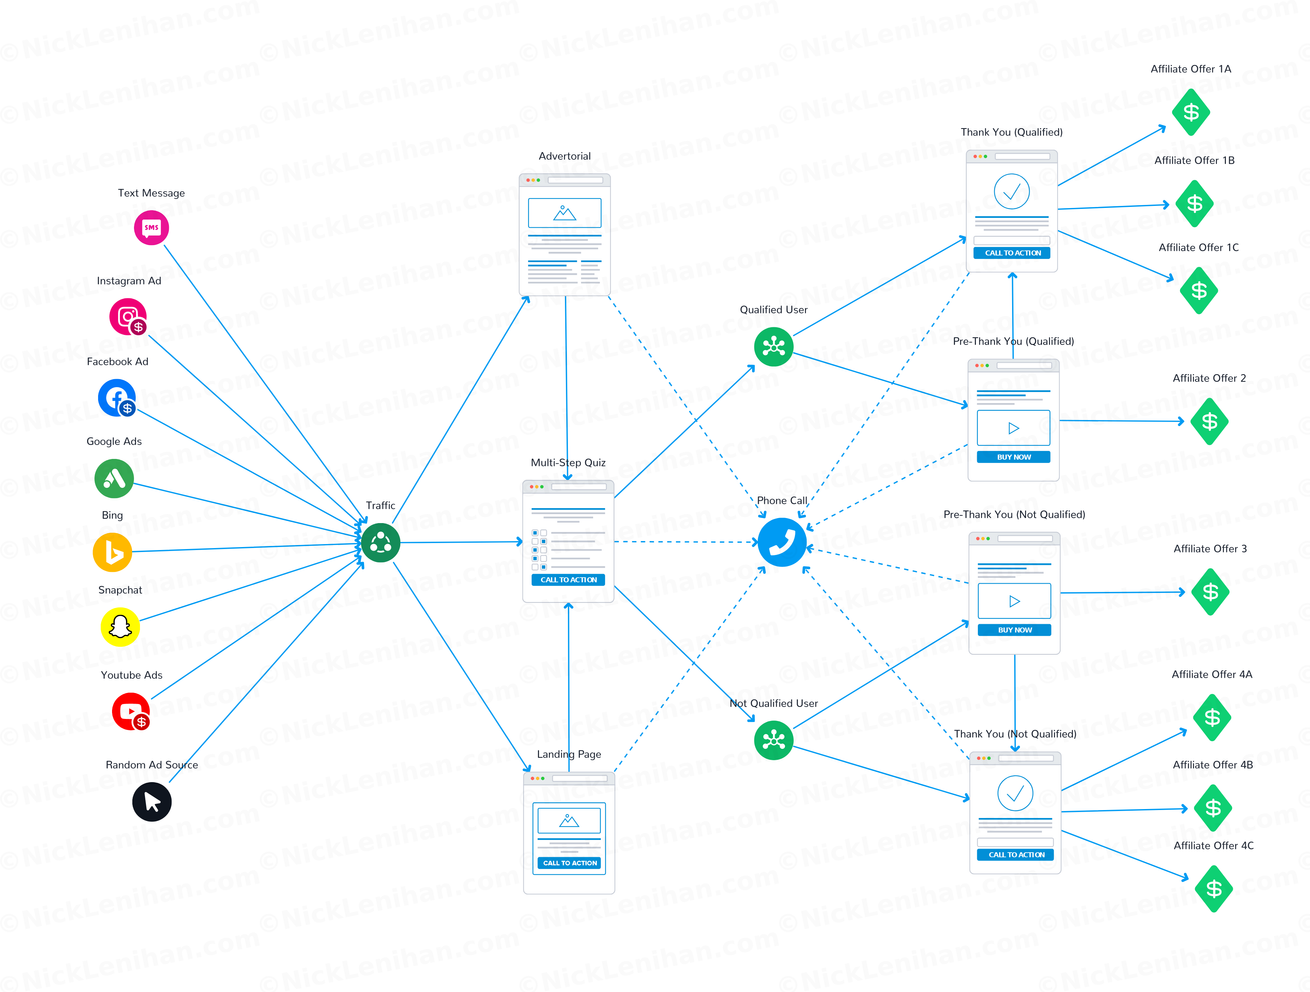 Mindmap of an example whitehat lead generation funnel affiliates can build